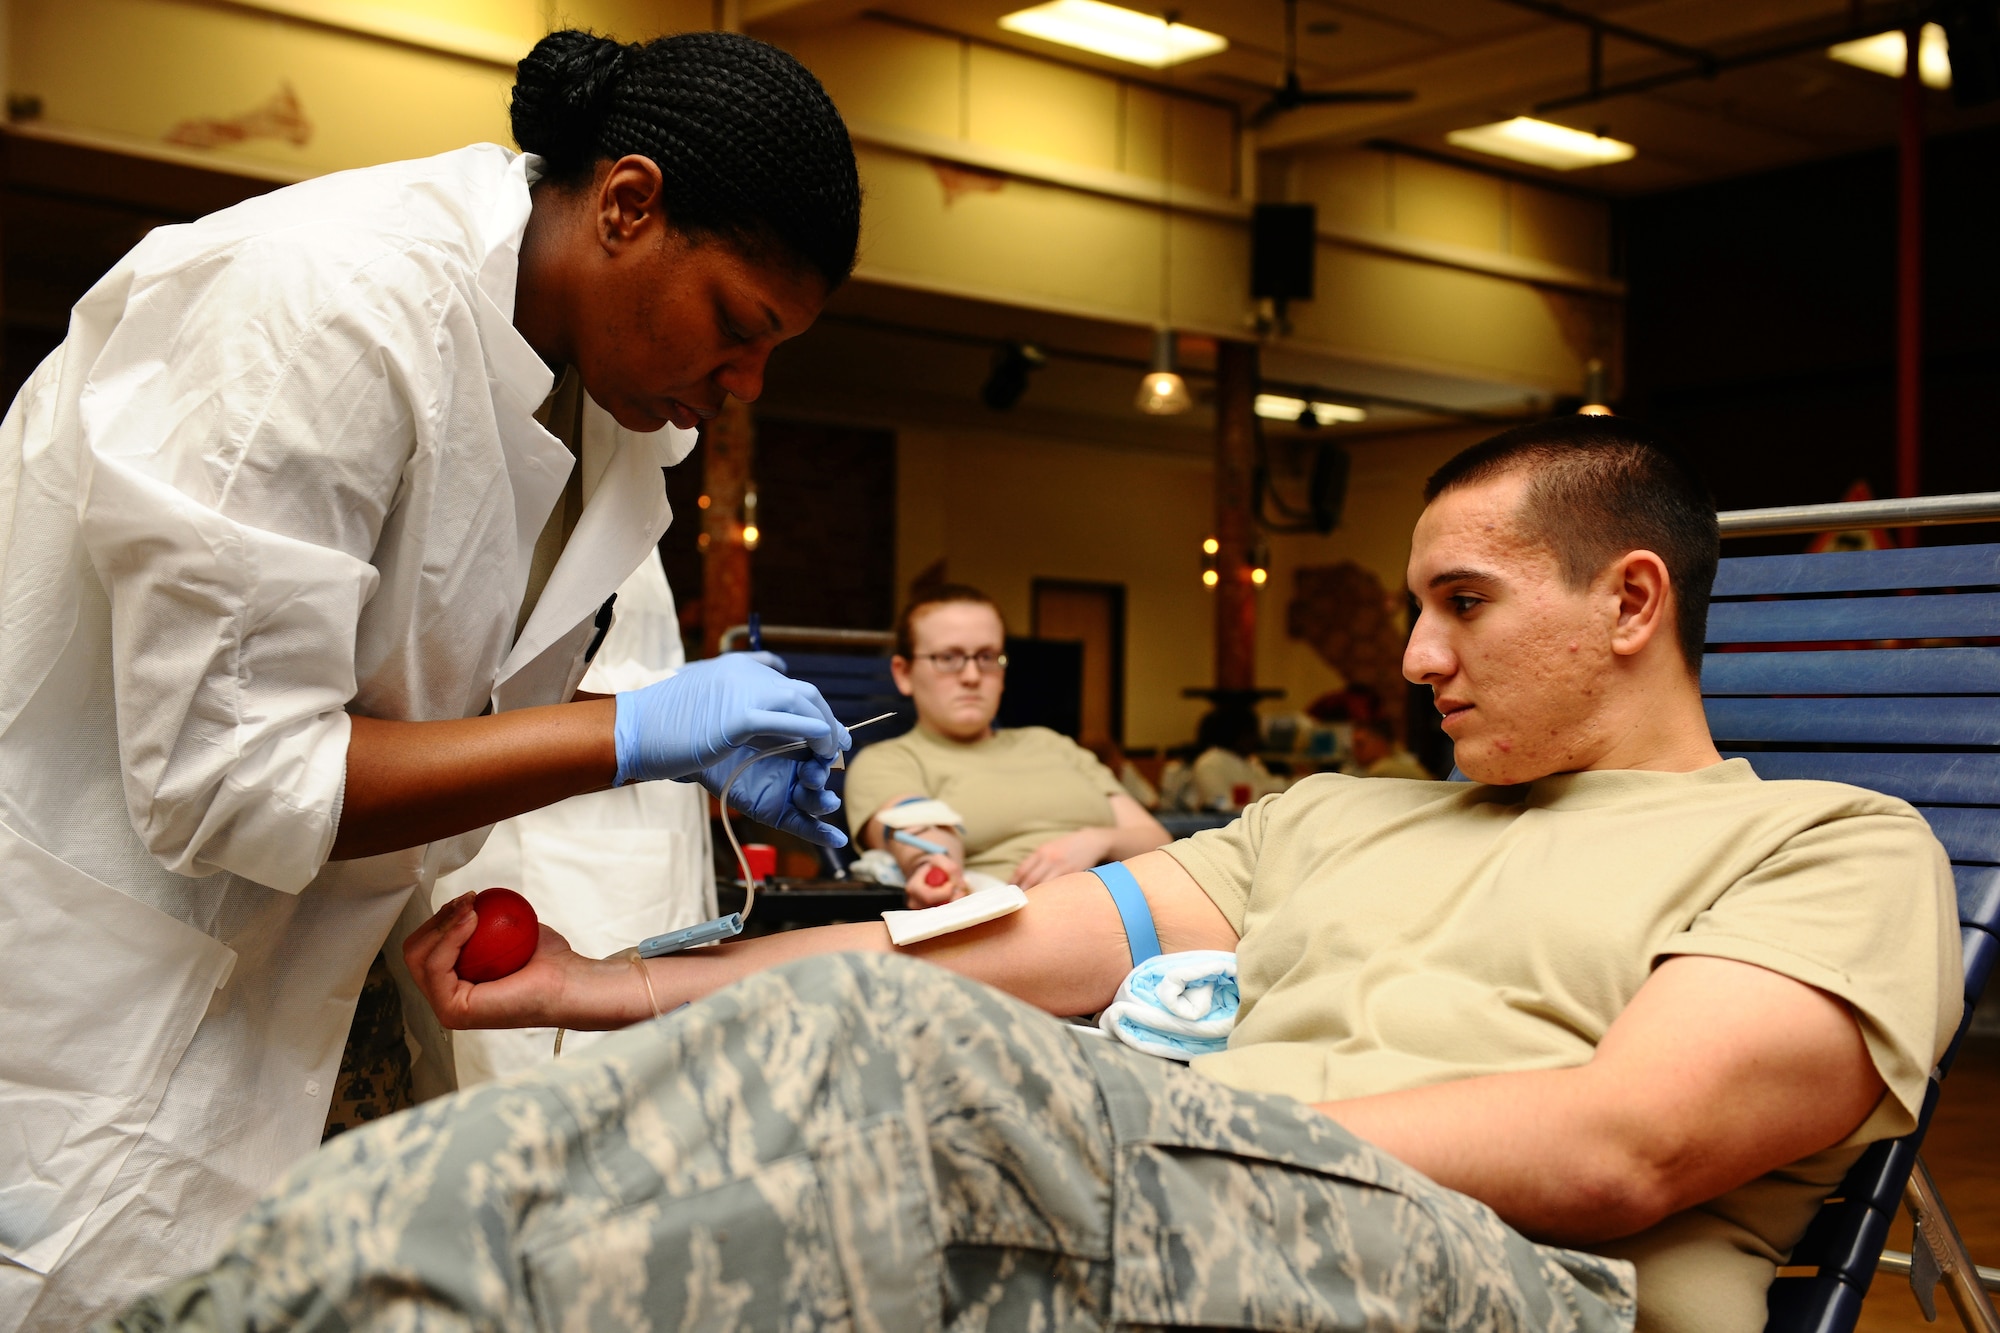 SPANGDAHLEM AIR BASE, Germany – Army Spc. Clarissa Parker, Landstuhl Regional Medical Center medical lab technician, prepares to draw blood from Air Force Senior Airman Michael Kimball, 480th Fighter Squadron intelligence analyst, during the Spangdahlem Community Blood Drive at the Brick House here March 21. Spangdahlem members donated blood to the Armed Services Blood Program which distributes blood products to service members and their families around the world. (U.S. Air Force photo by Airman 1st Class Matthew B. Fredericks/Released)